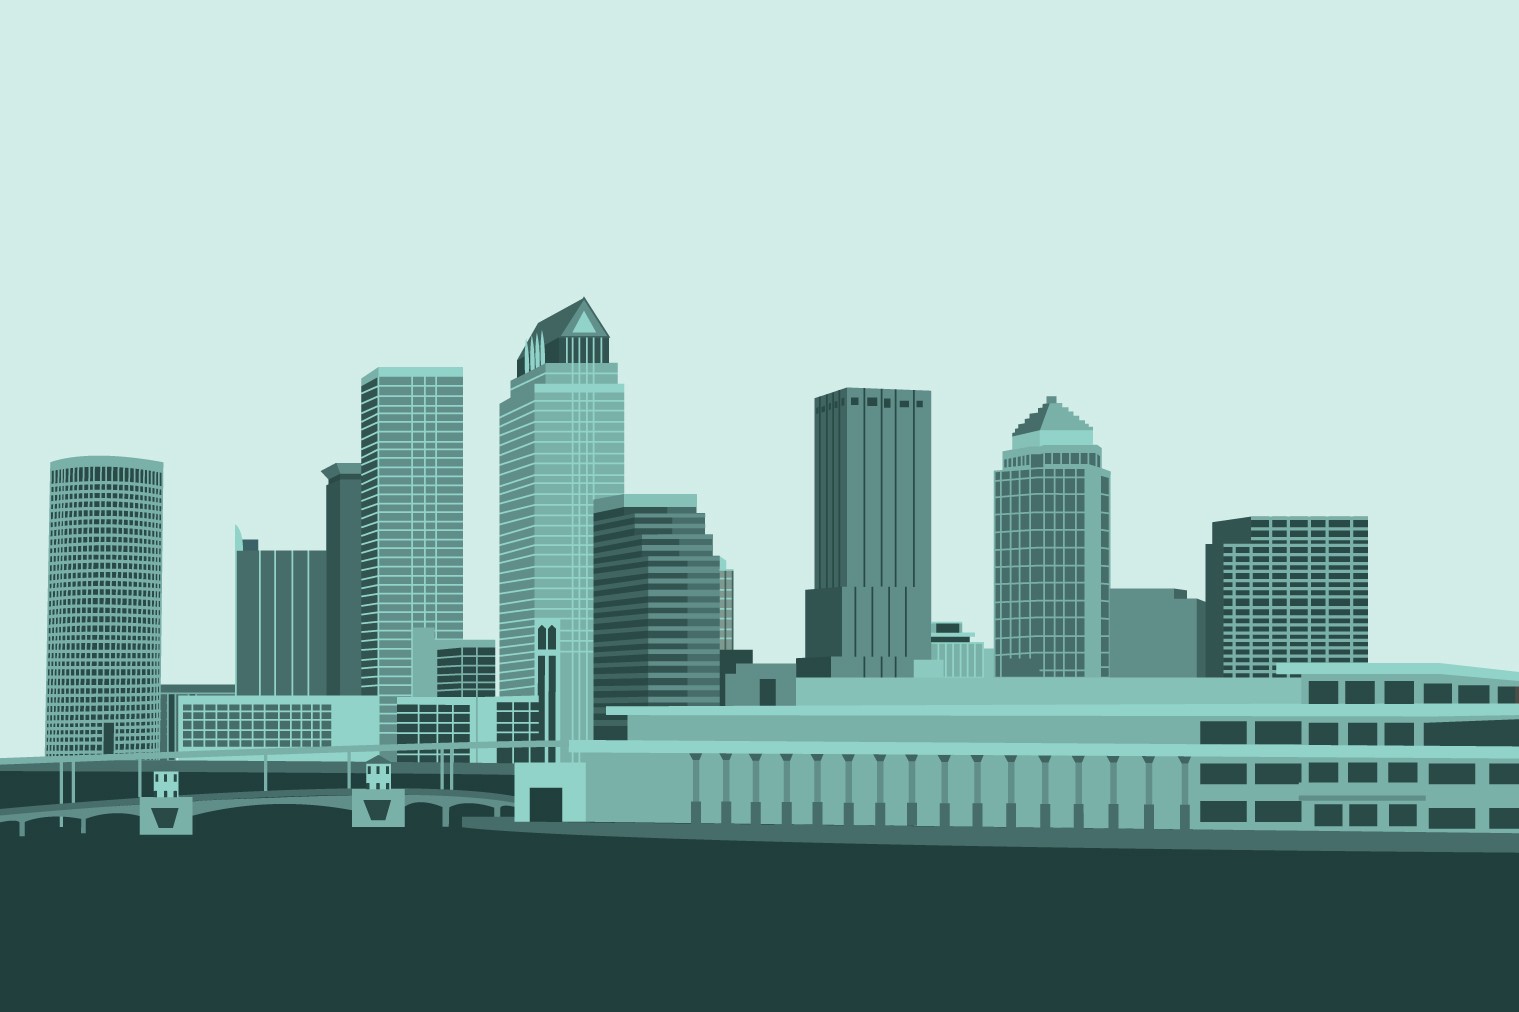 An illustrated skyline of downtown Tampa, Florida. Illustration by Ali De Sousa